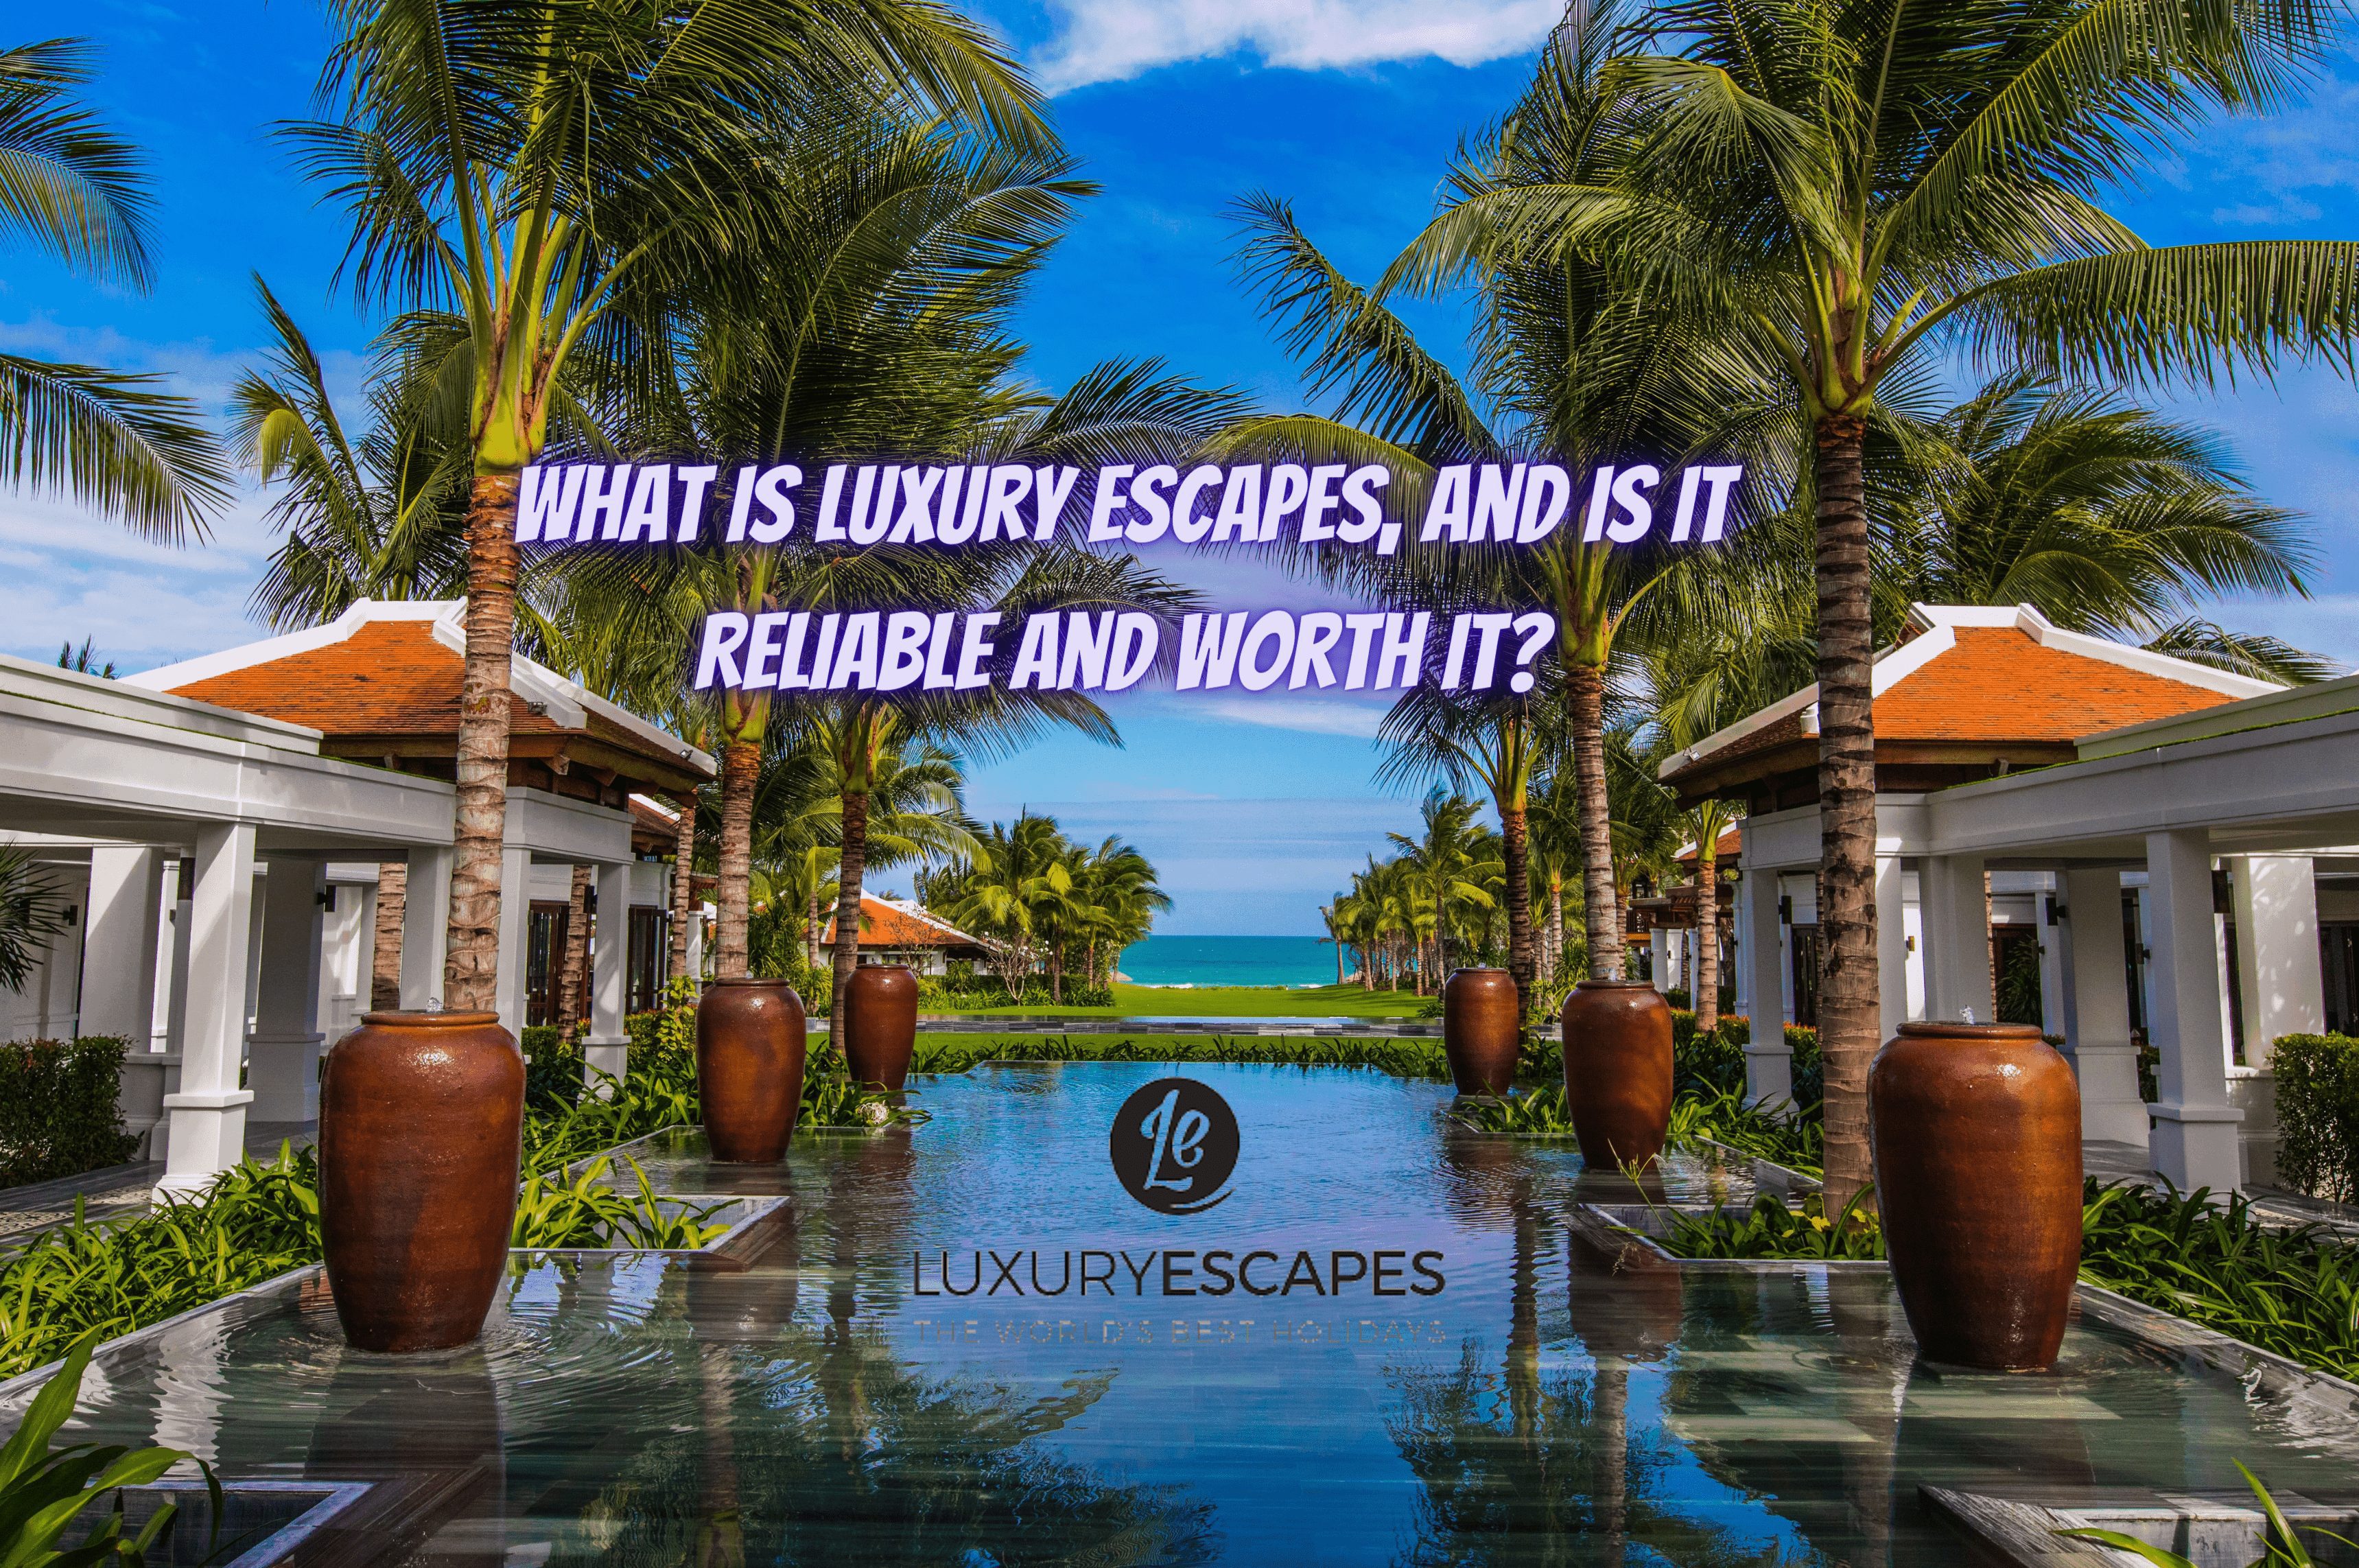 What Is Luxury Escapes, and Is It Reliable and Worth It?